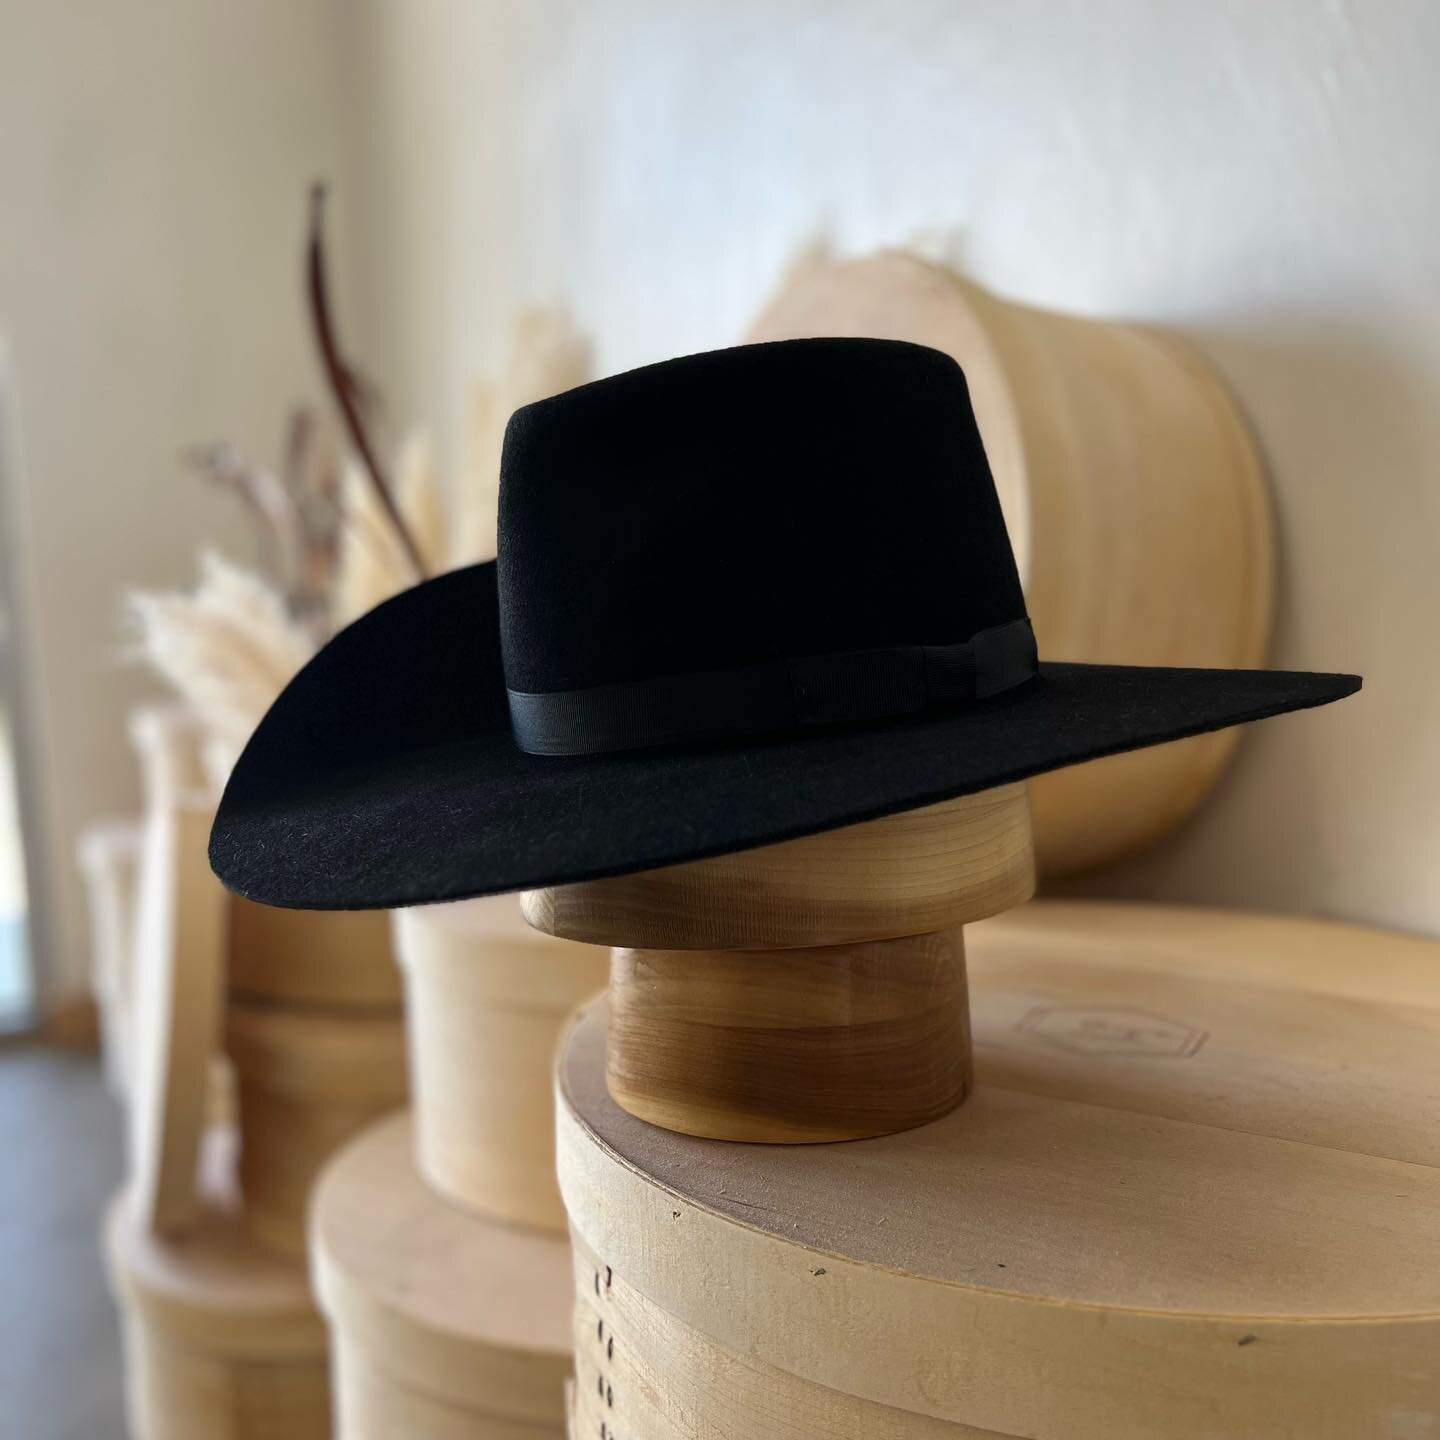 Who doesn&rsquo;t love some asymmetry? Monochromatic can still be bold 🖤⚡️
.
.
#greycollectivehats #custom #customhats #hatmaker #asymetricalhat #asymetrical #furfelthat #statementpiece #smallbusiness #albuquerque #newmexico #makersofinstagram